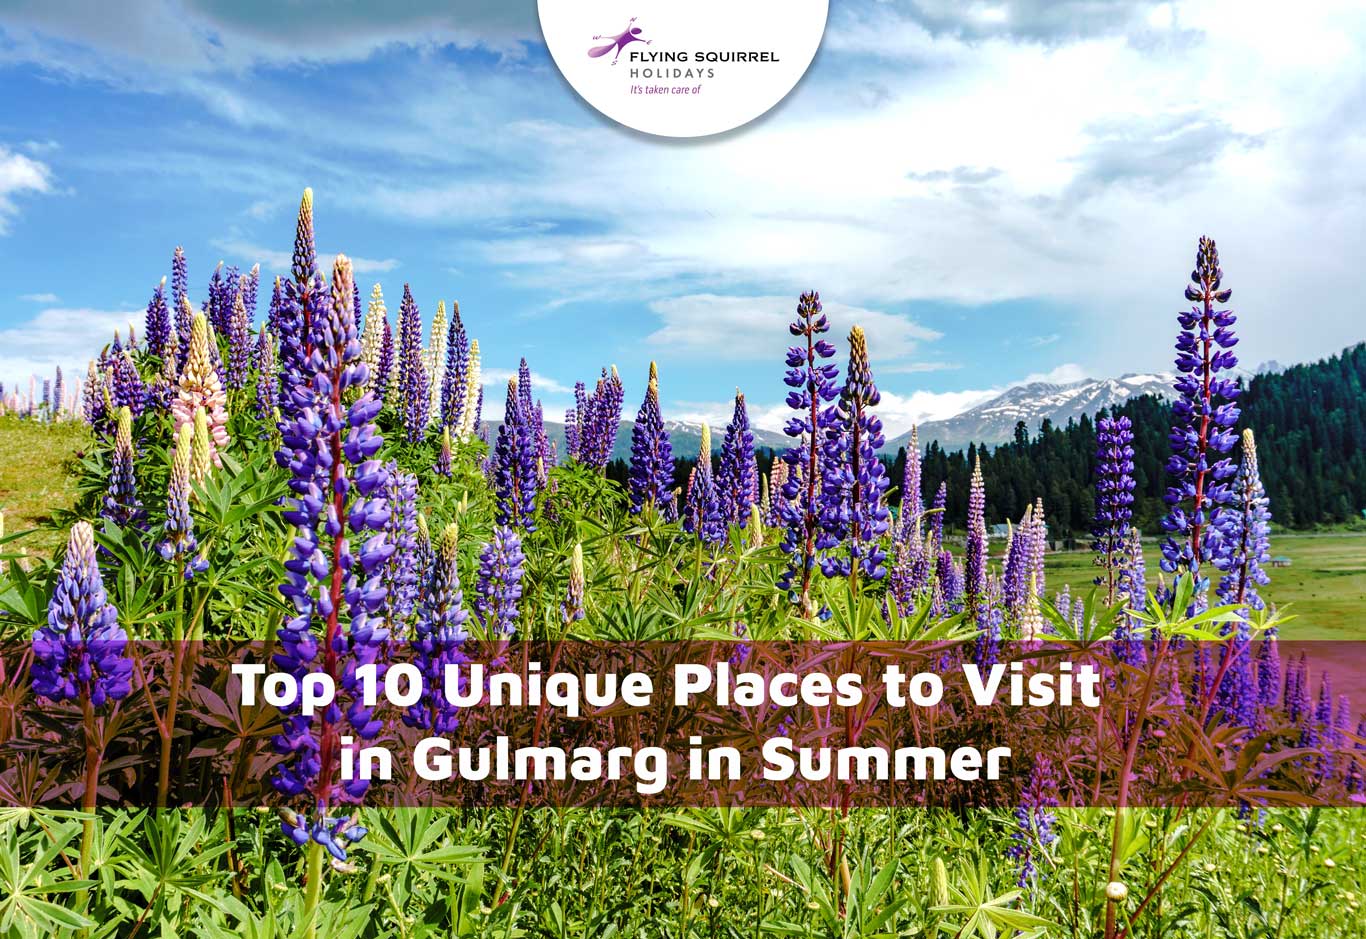 Top 10 Unique Places to Visit in Gulmarg in Summer